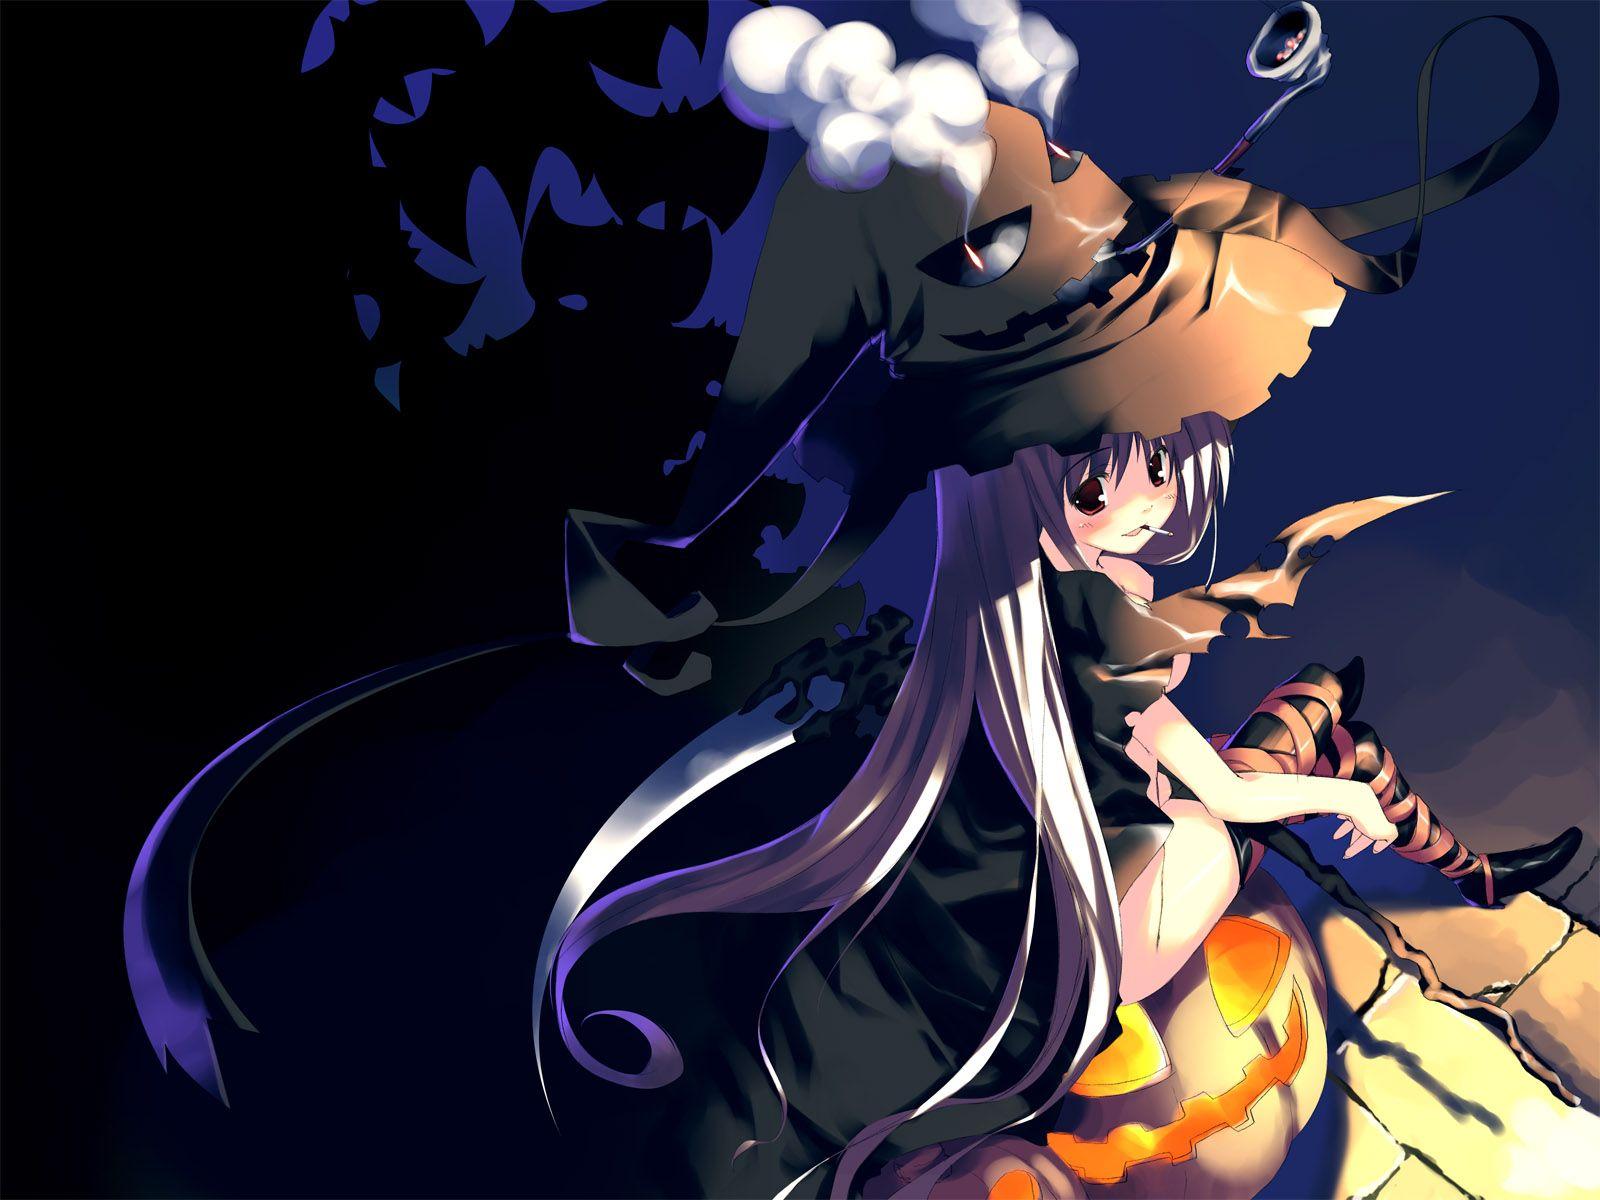 Cute Witch Anime Wallpaper. Anime halloween, Witch wallpaper, Anime